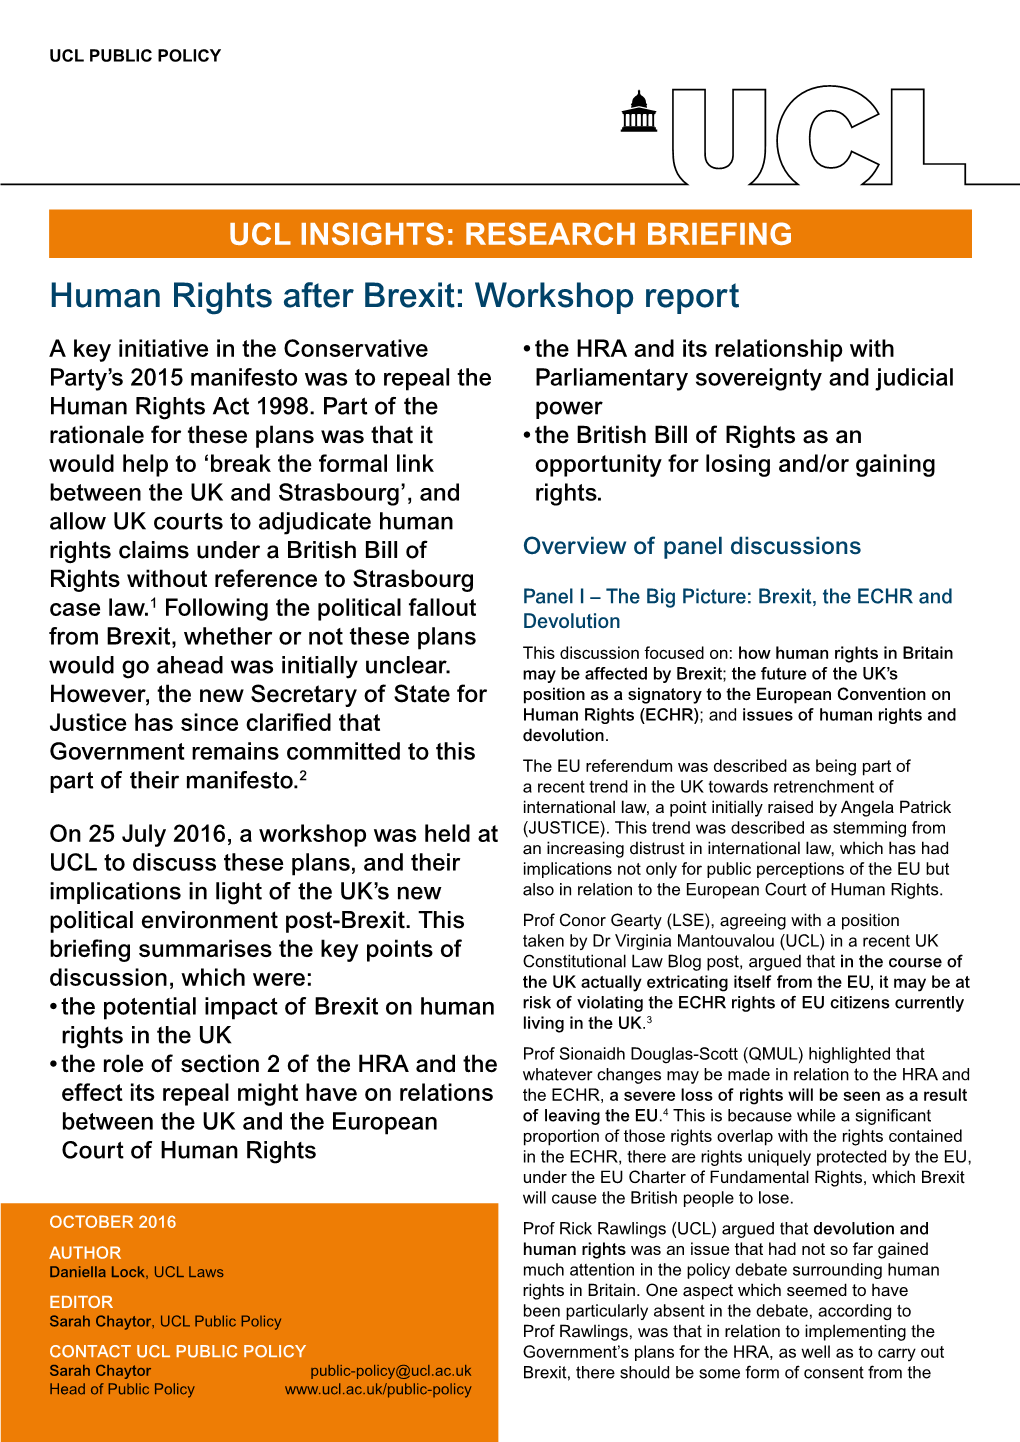 Human Rights After Brexit: Workshop Report